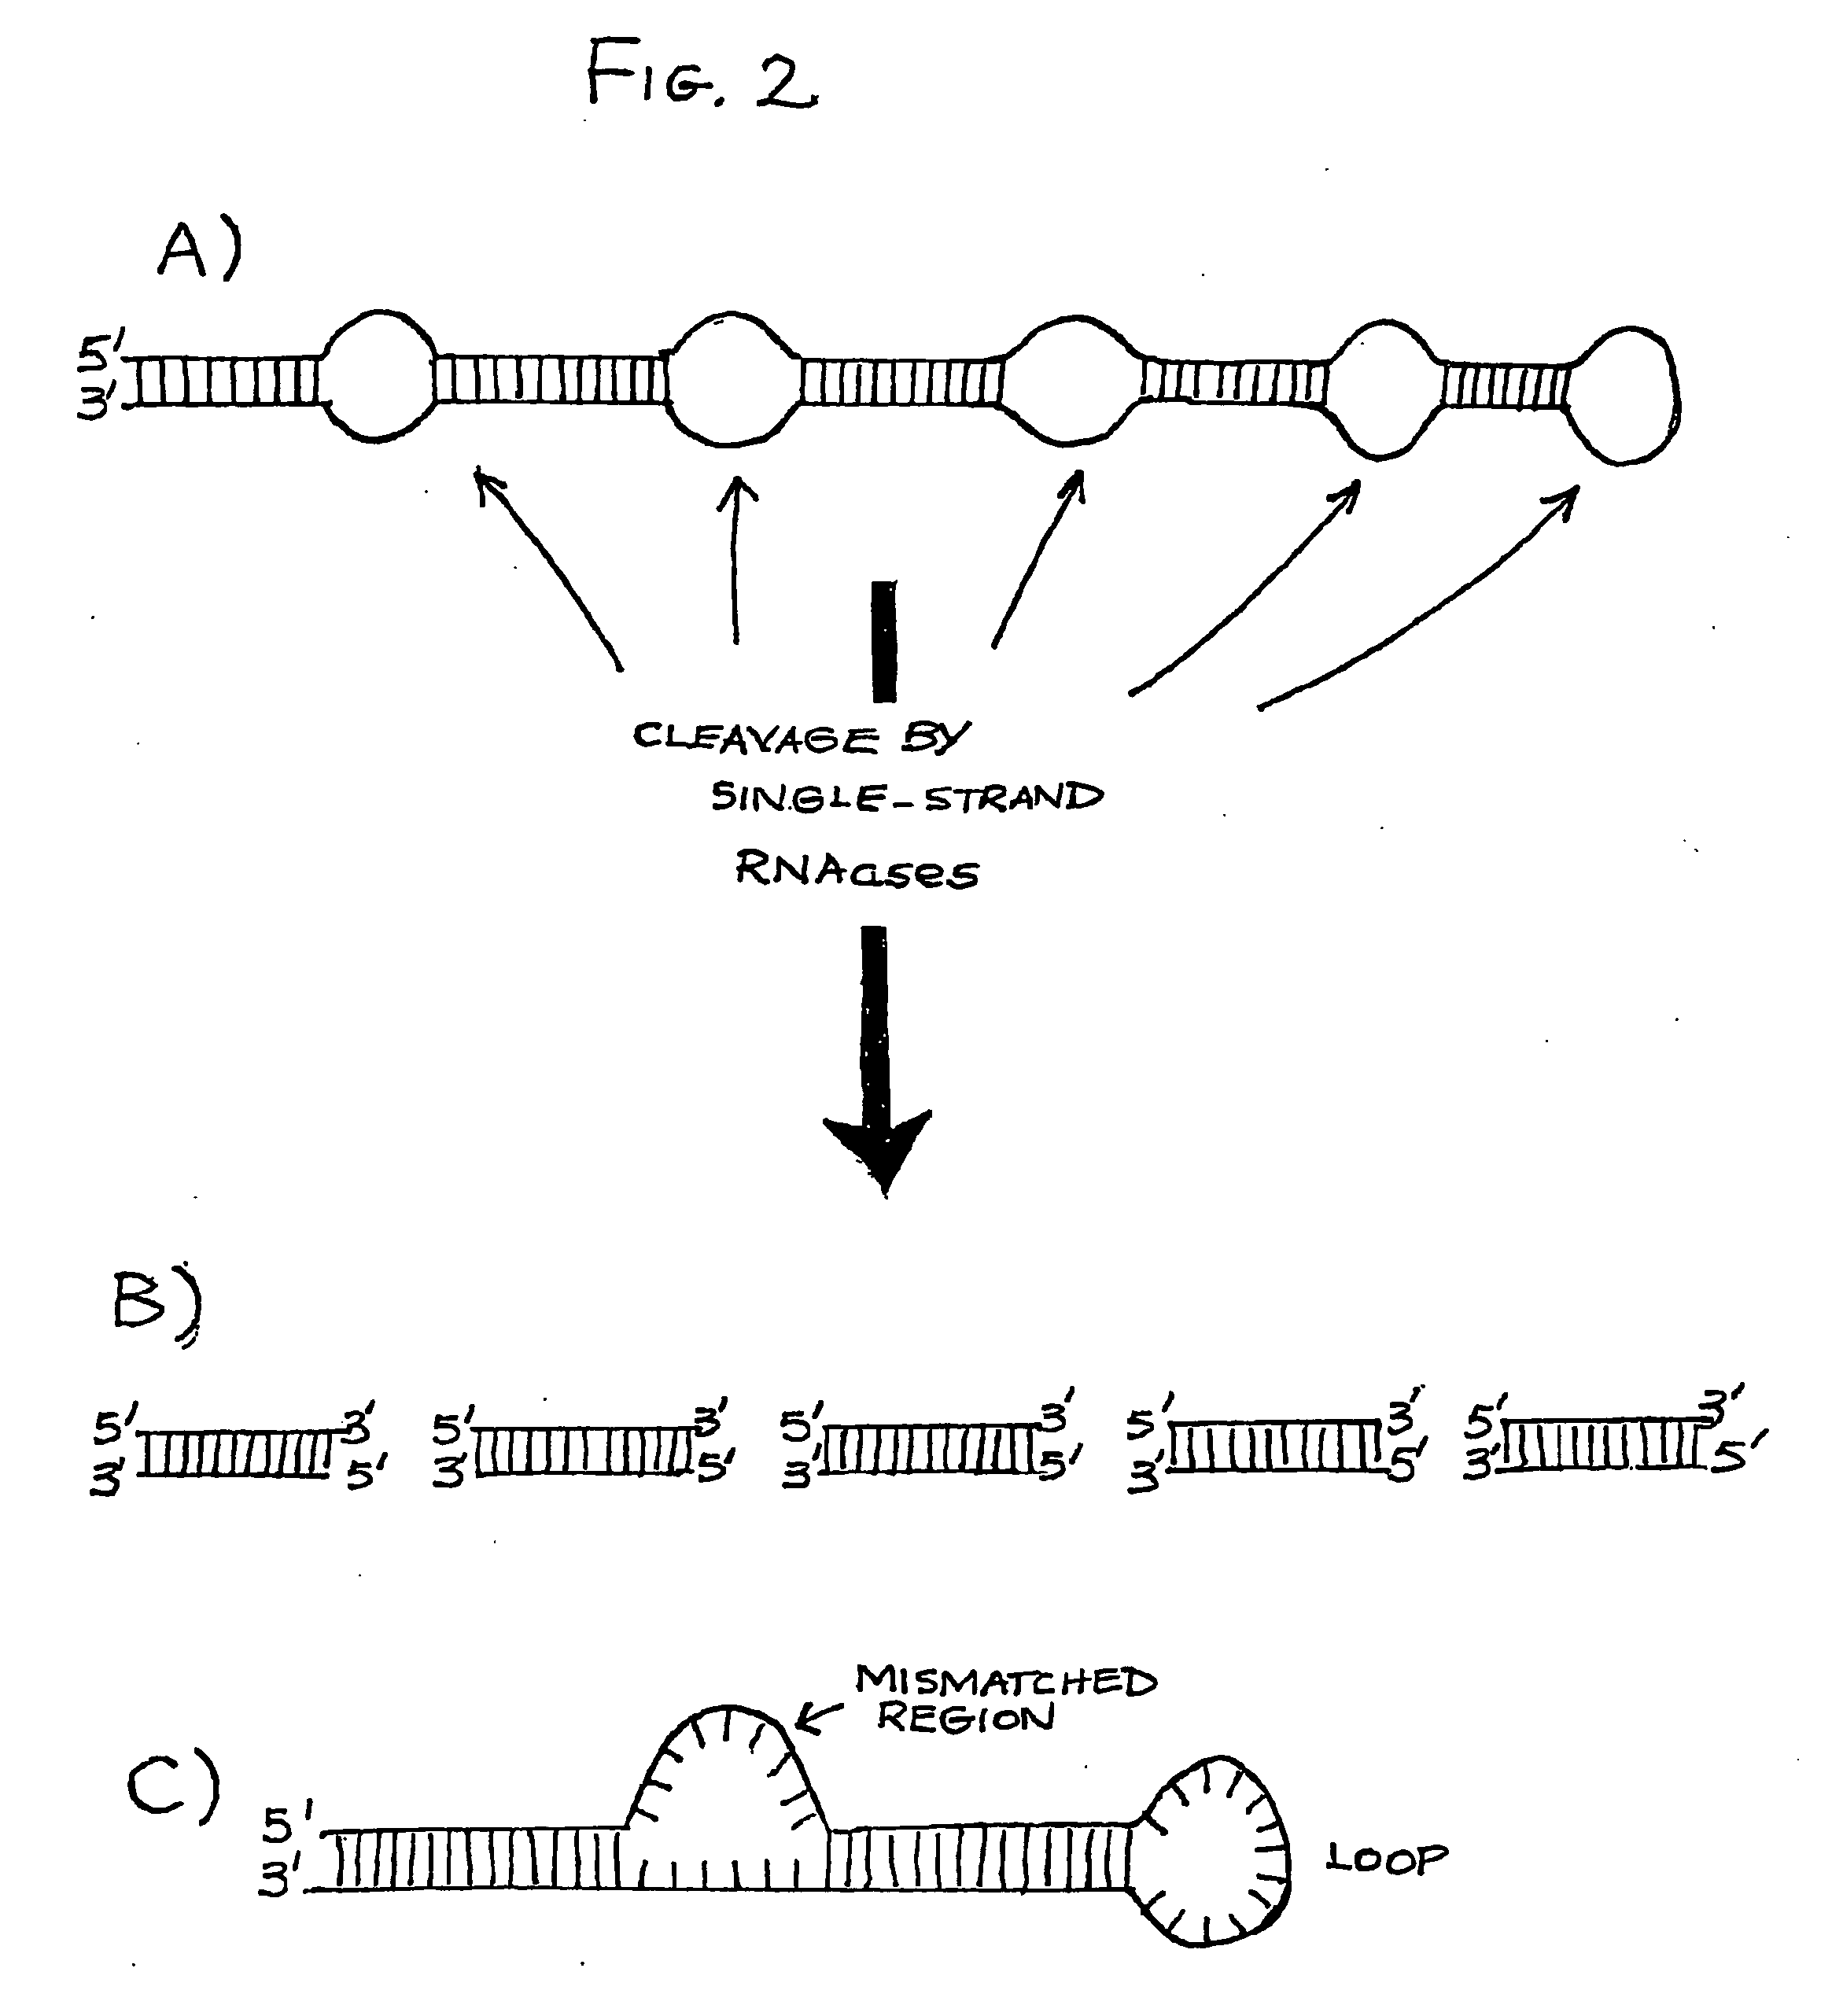 Double-stranded rna structures and constructs, and methods for generating and using the same